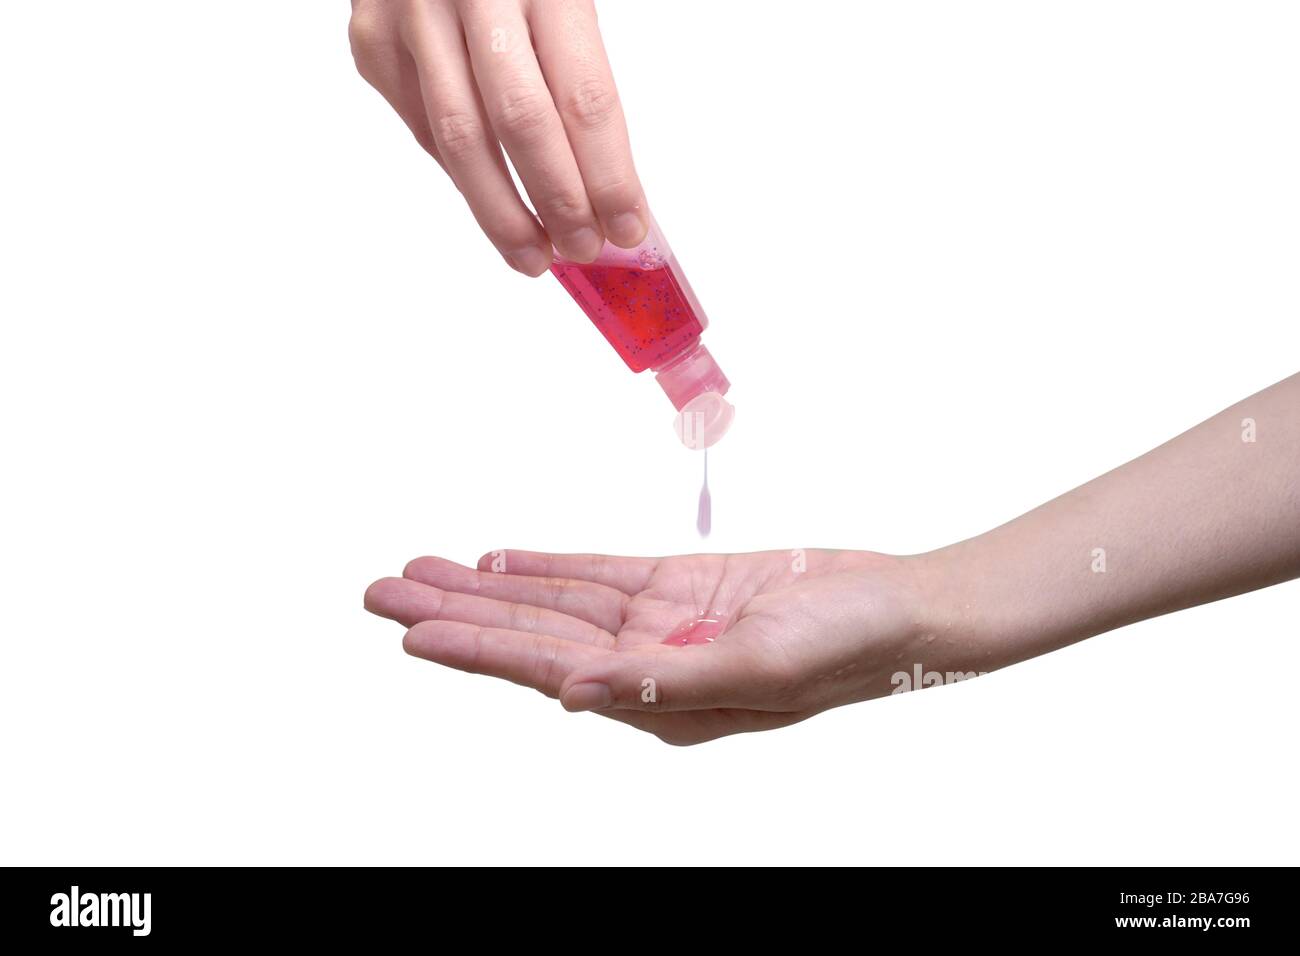 Hand of woman that applying alcohol   Red gel to make cleaning and clear germ, bacteria, Health care concept. Stock Photo